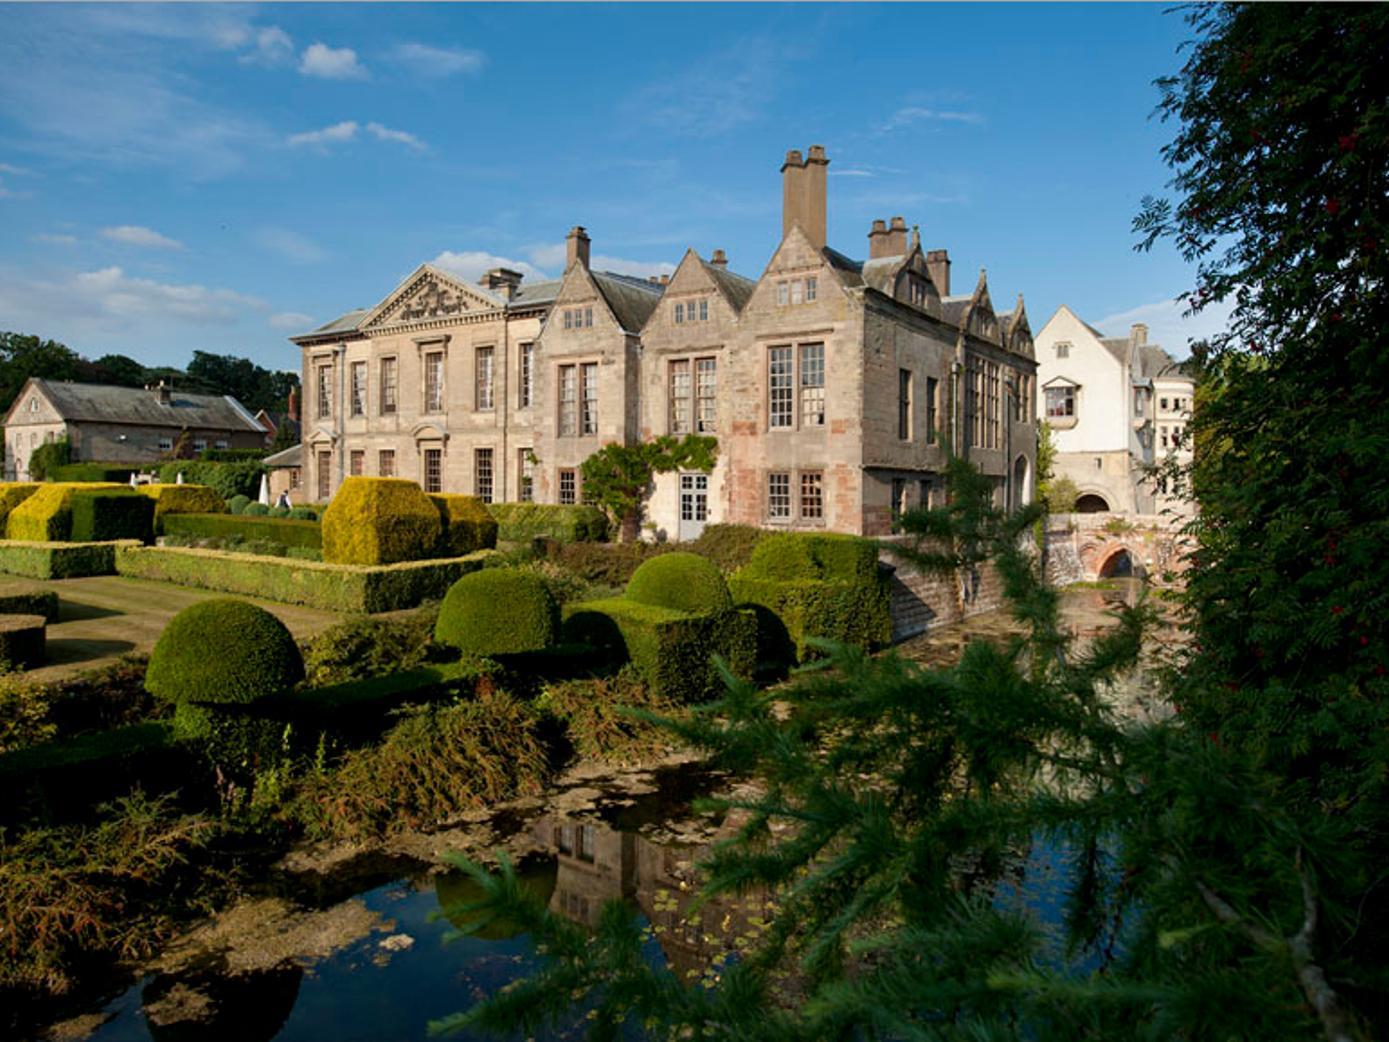 Coombe Abbey Hotel Booking,Coombe Abbey Hotel Resort,Coombe Abbey Hotel reservation,Coombe Abbey Hotel deals,Coombe Abbey Hotel Phone Number,Coombe Abbey Hotel website,Coombe Abbey Hotel E-mail,Coombe Abbey Hotel address,Coombe Abbey Hotel Overview,Rooms & Rates,Coombe Abbey Hotel Photos,Coombe Abbey Hotel Location Amenities,Coombe Abbey Hotel Q&A,Coombe Abbey Hotel Map,Coombe Abbey Hotel Gallery,Coombe Abbey Hotel United Kingdom 2016, United Kingdom Coombe Abbey Hotel room types 2016, United Kingdom Coombe Abbey Hotel price 2016, Coombe Abbey Hotel in United Kingdom 2016, United Kingdom Coombe Abbey Hotel address, Coombe Abbey Hotel United Kingdom booking online, United Kingdom Coombe Abbey Hotel travel services, United Kingdom Coombe Abbey Hotel pick up services.